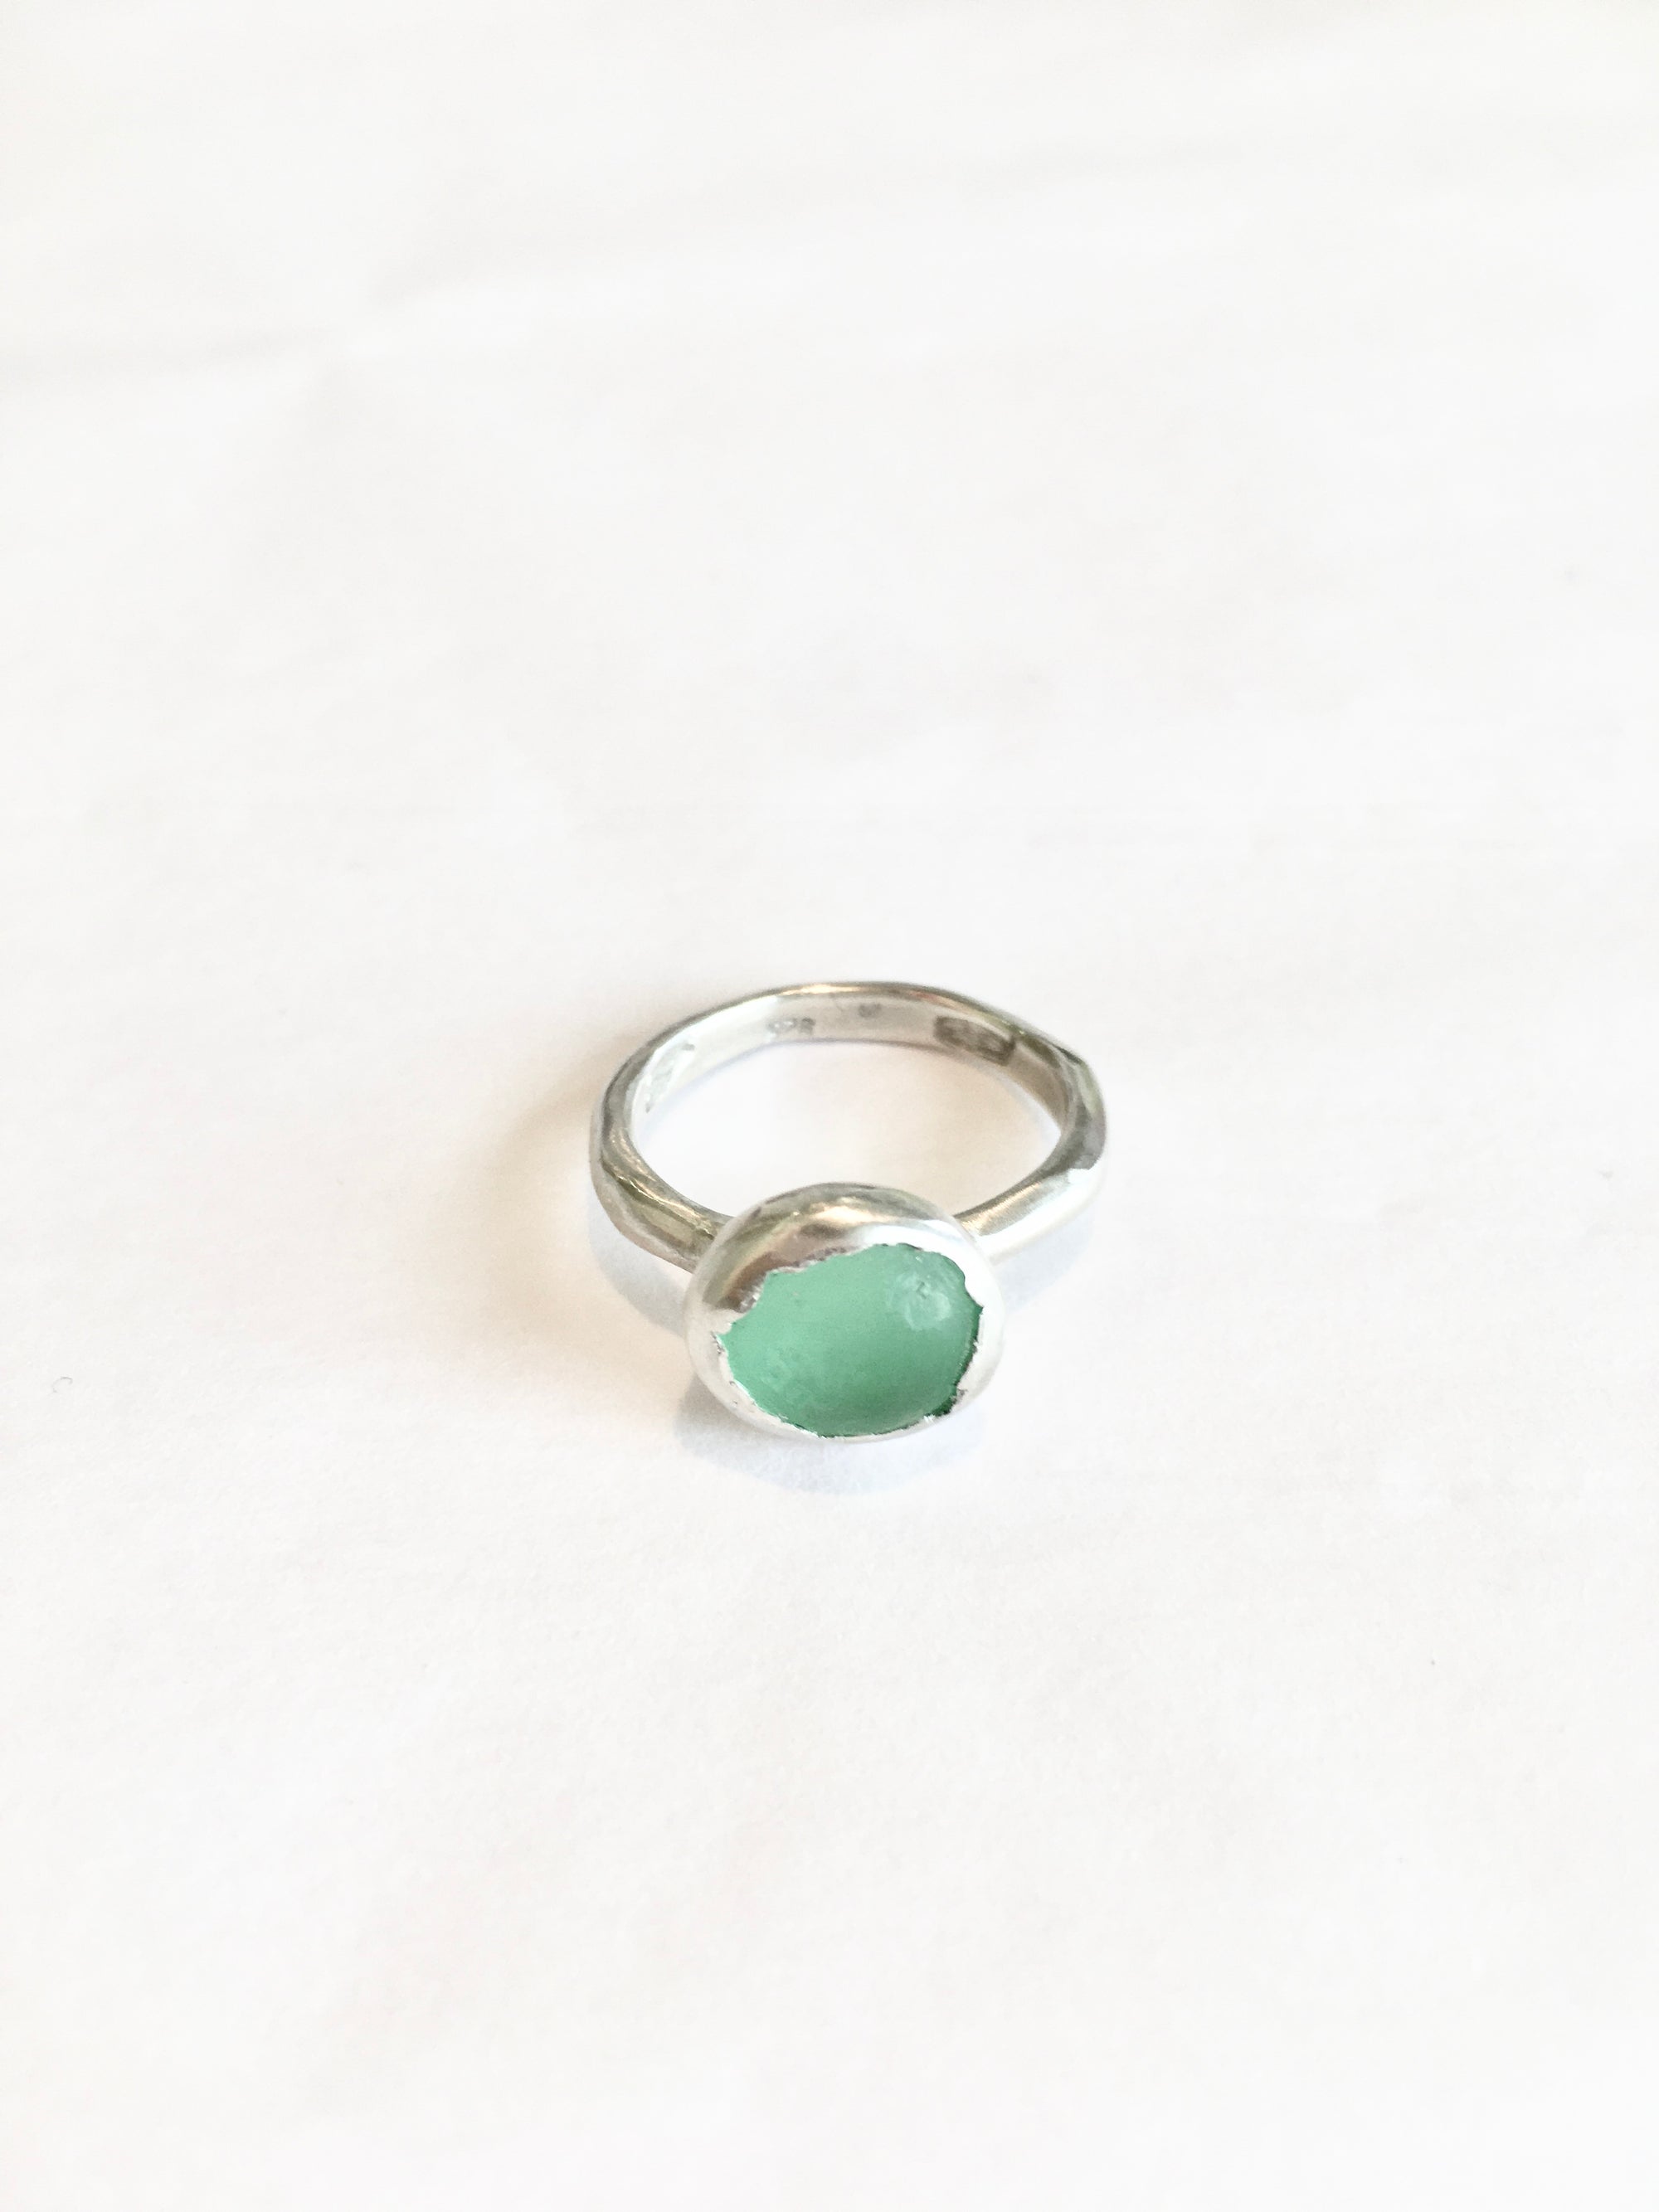 “Button” ring sterling silver and Mint Green Resin